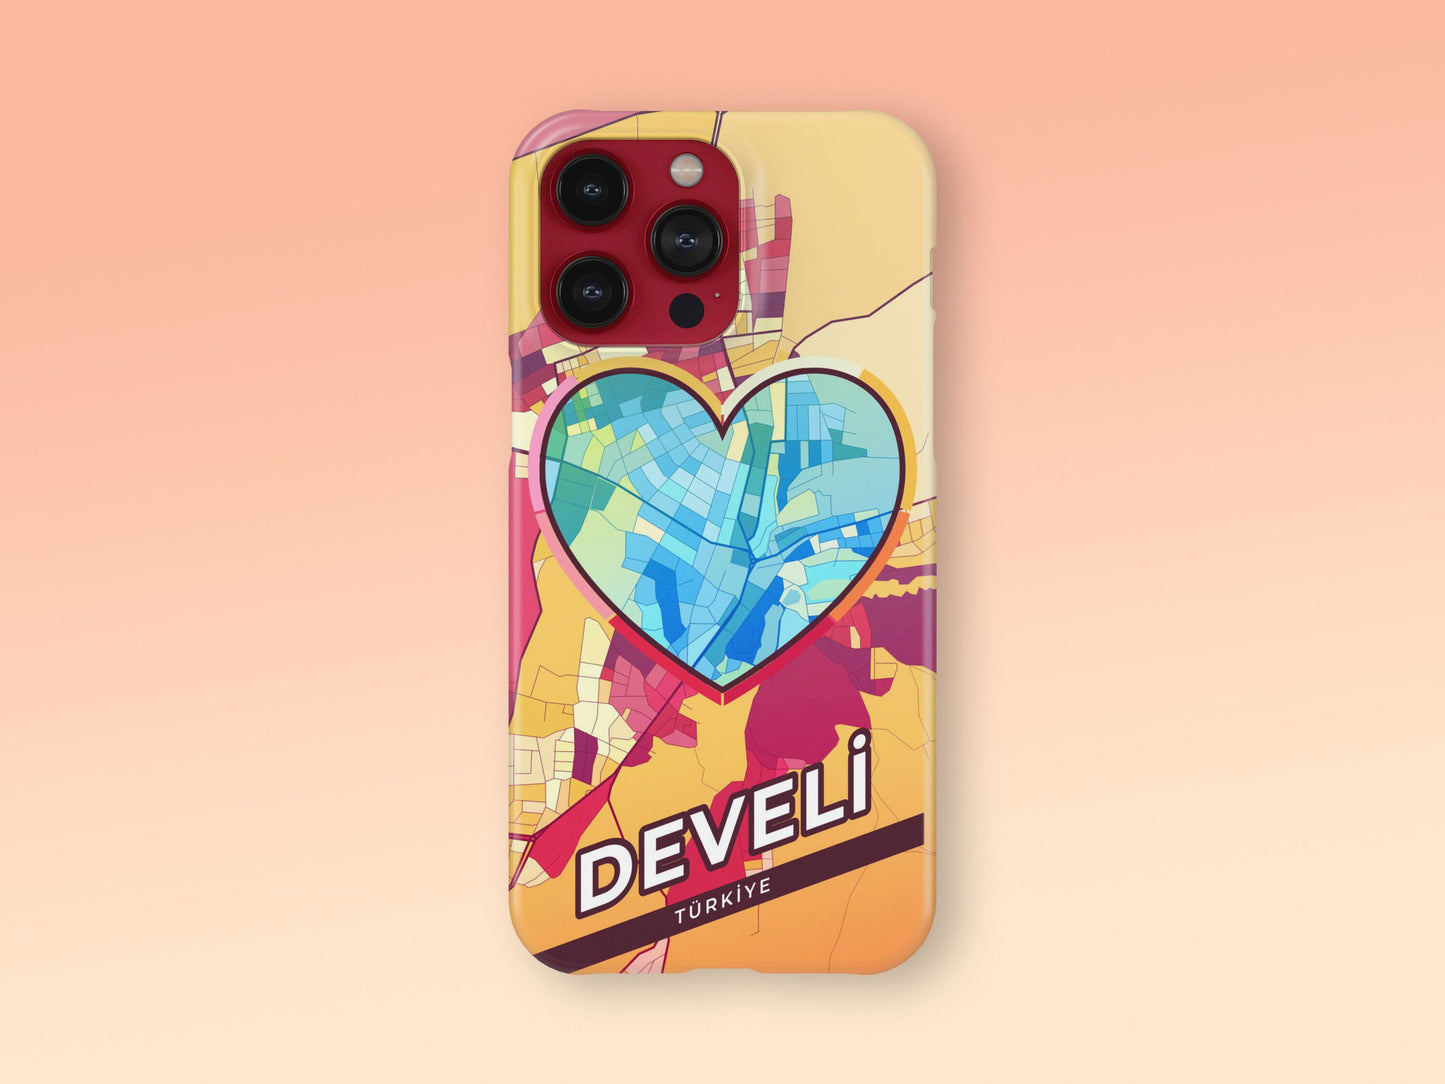 Develi Turkey slim phone case with colorful icon. Birthday, wedding or housewarming gift. Couple match cases. 2